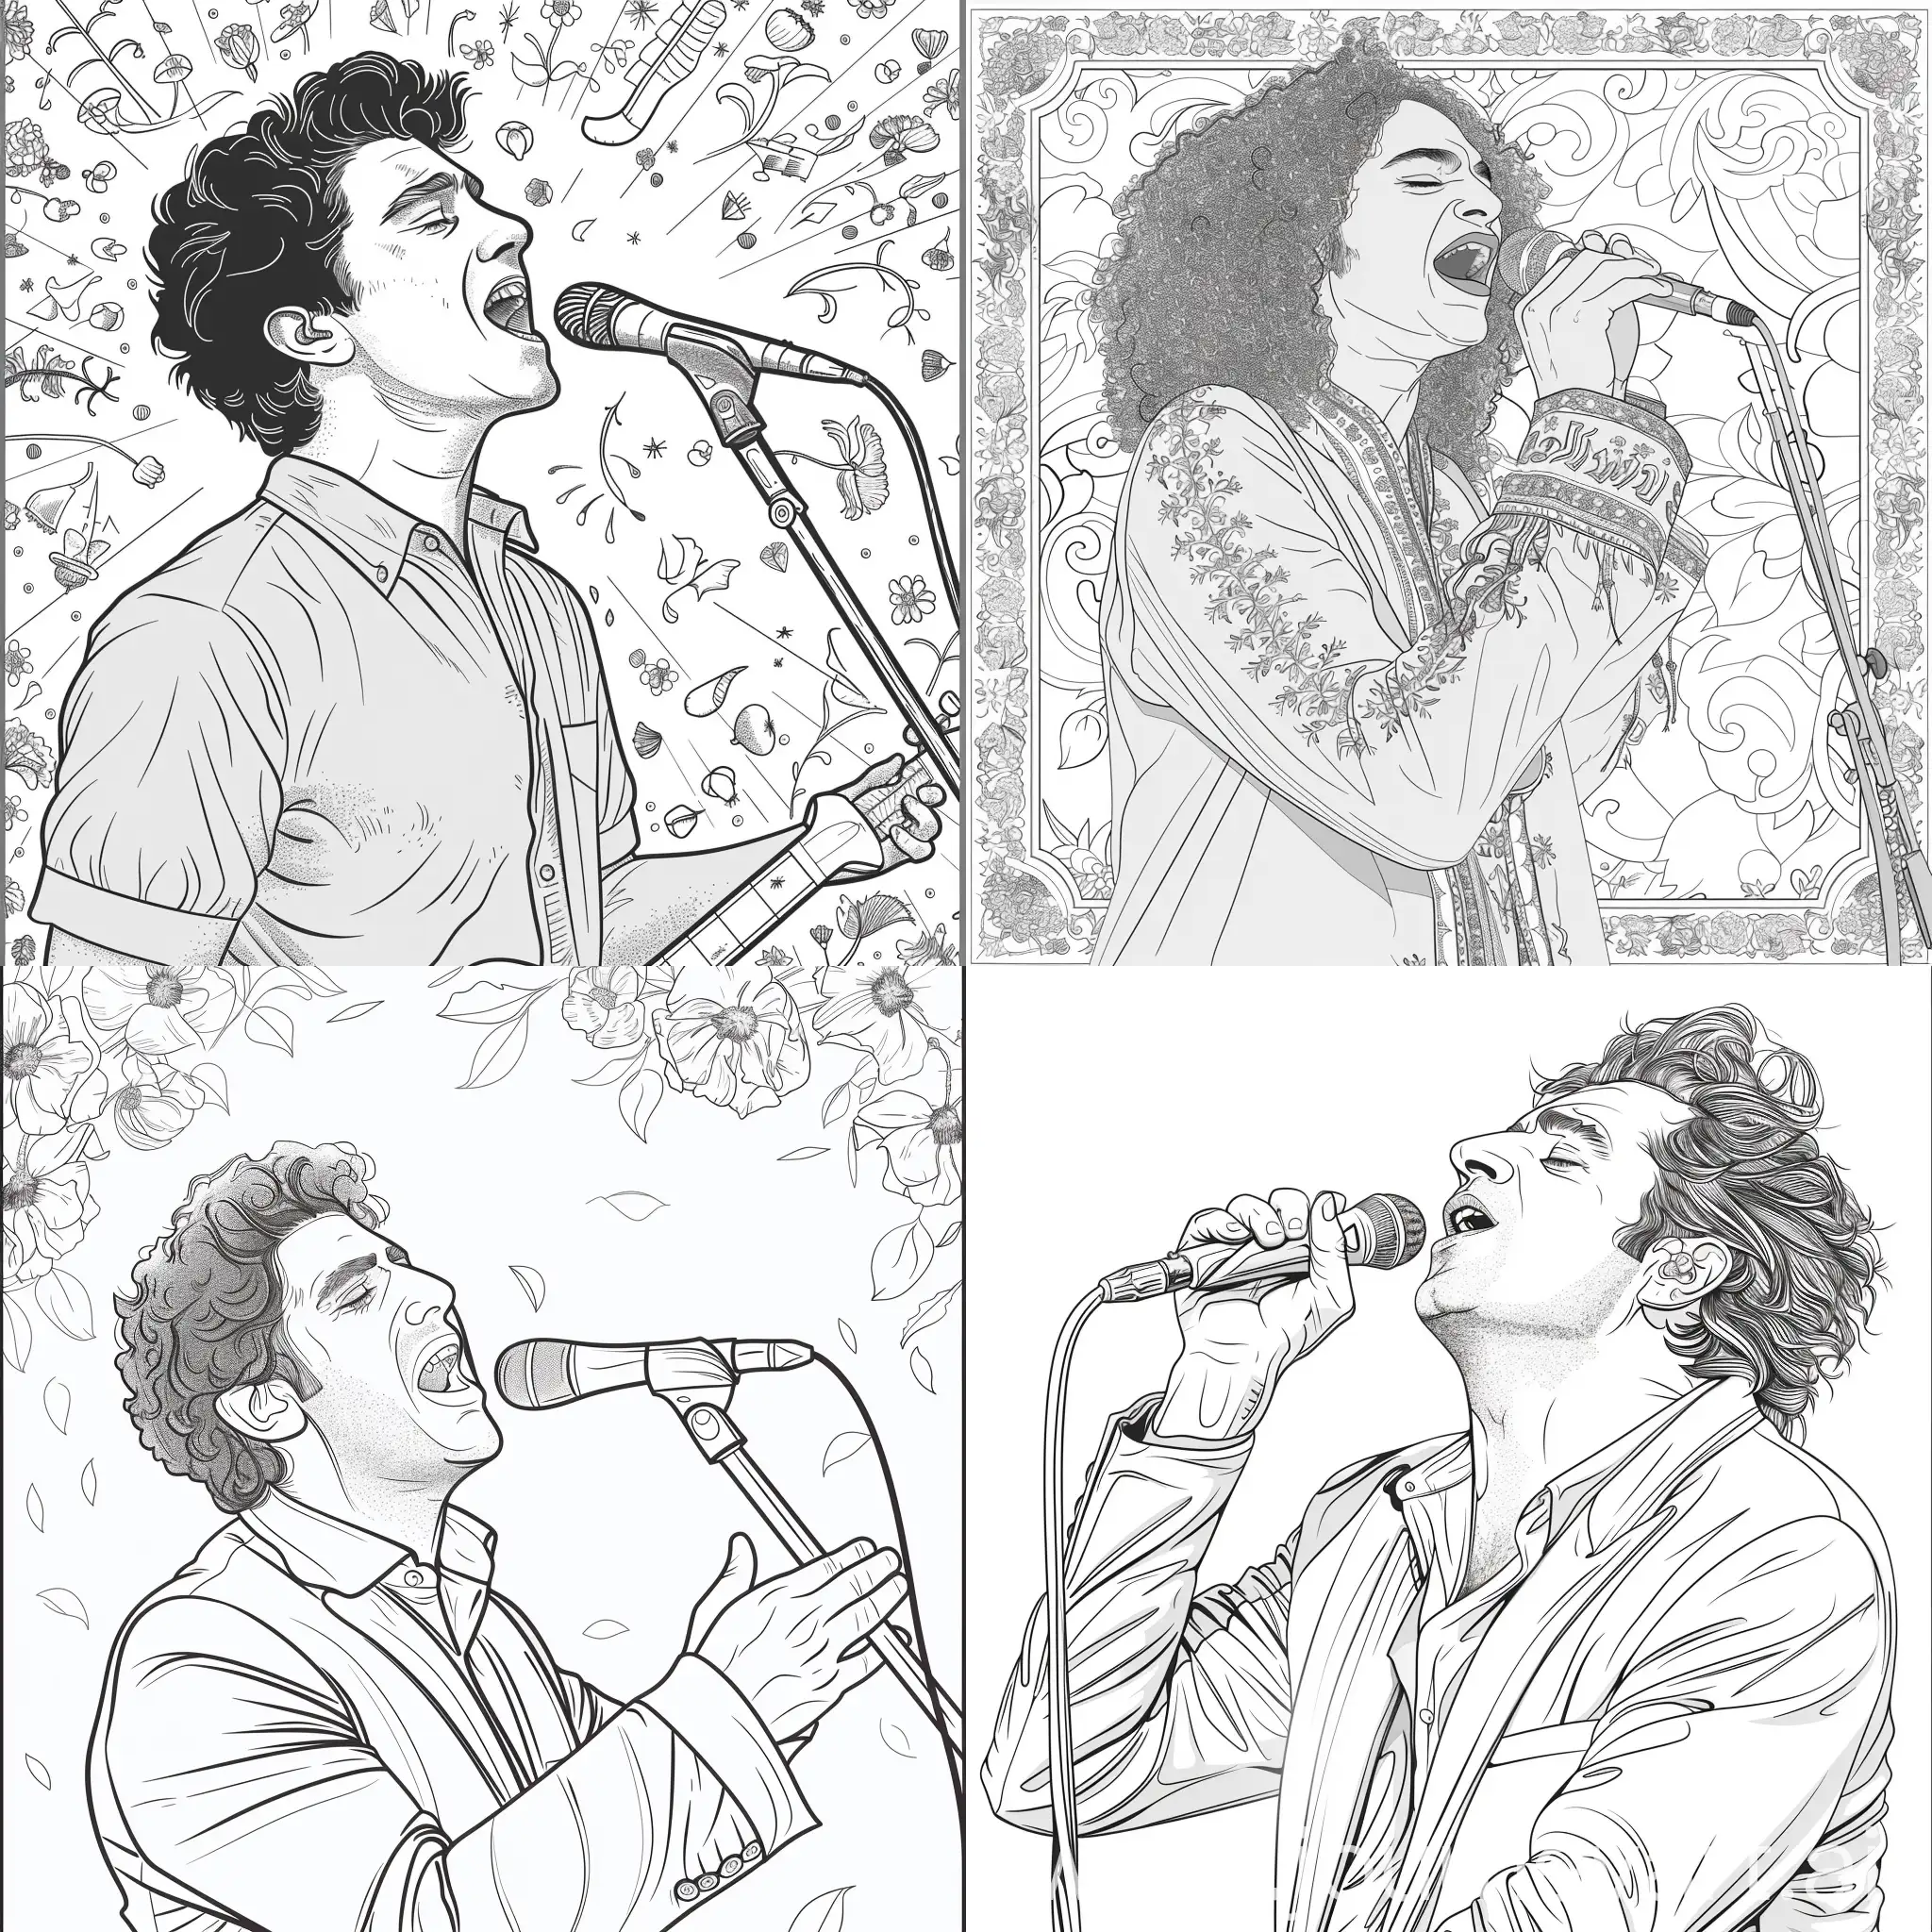 A coloring page of the Israeli singer Yizhar Cohen singing the song Avnivi

